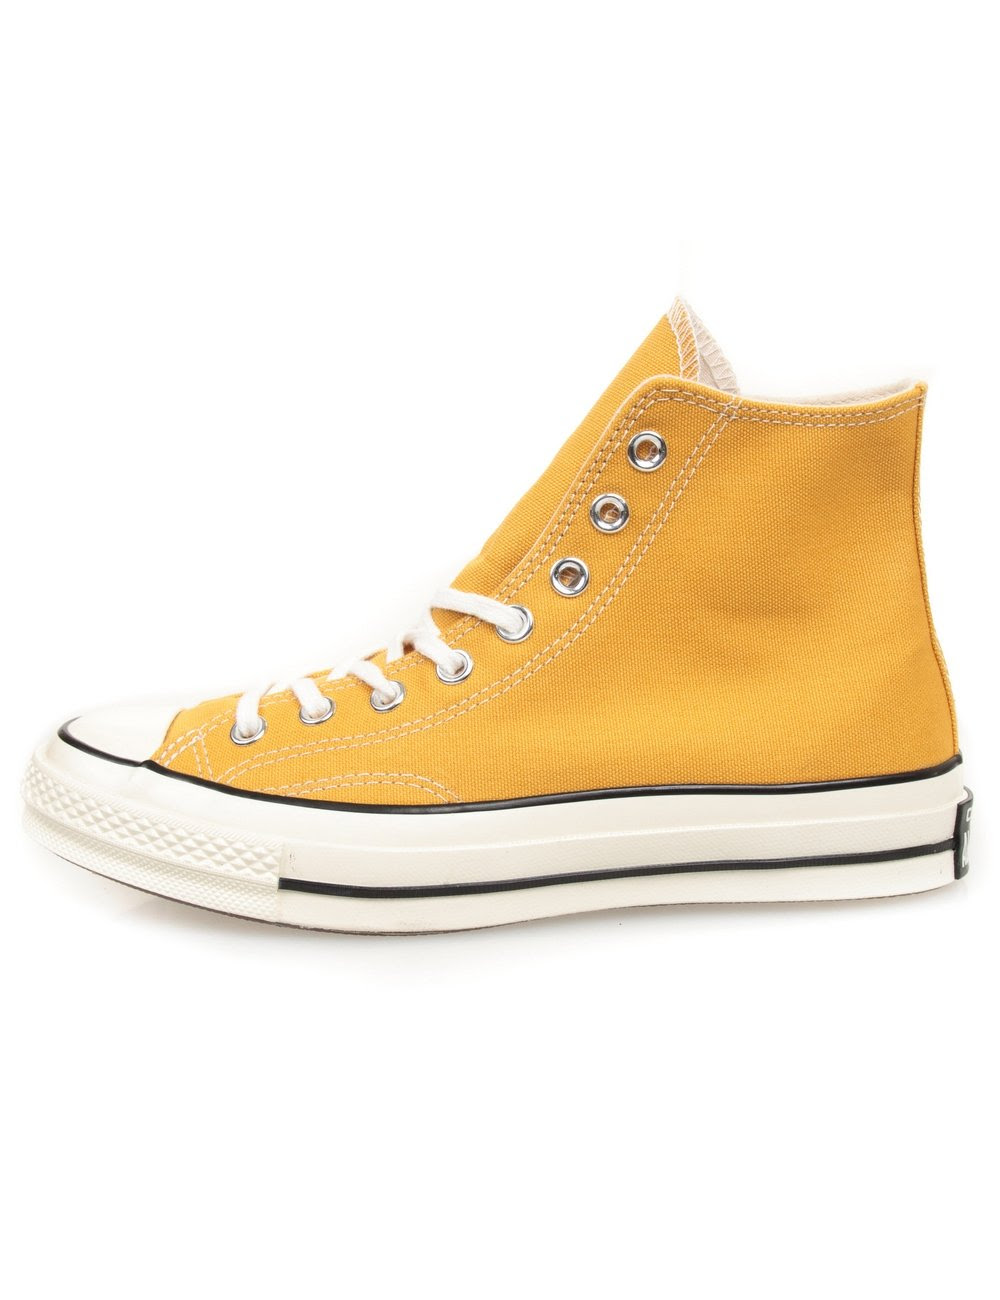 Converse Chuck Taylor 1970s Hi - Sunflower - Trainers from ...